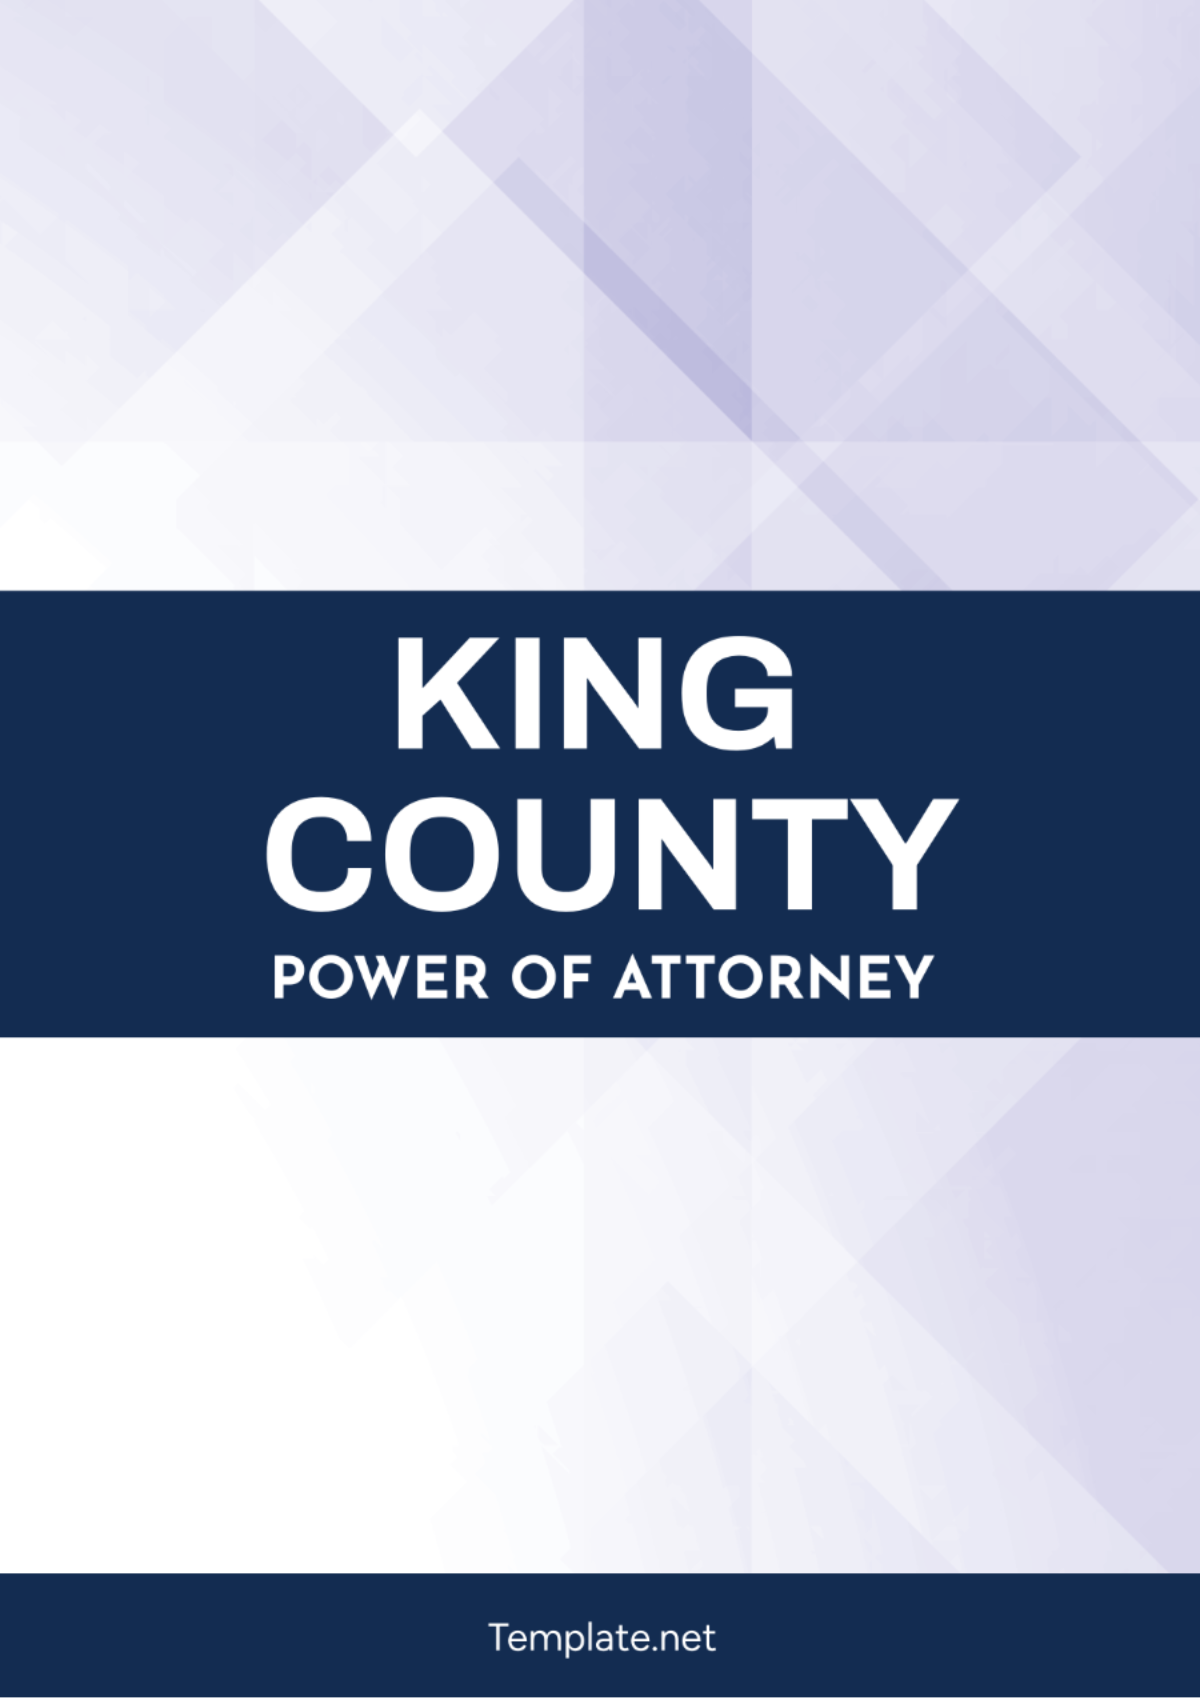 King County Power of Attorney Template